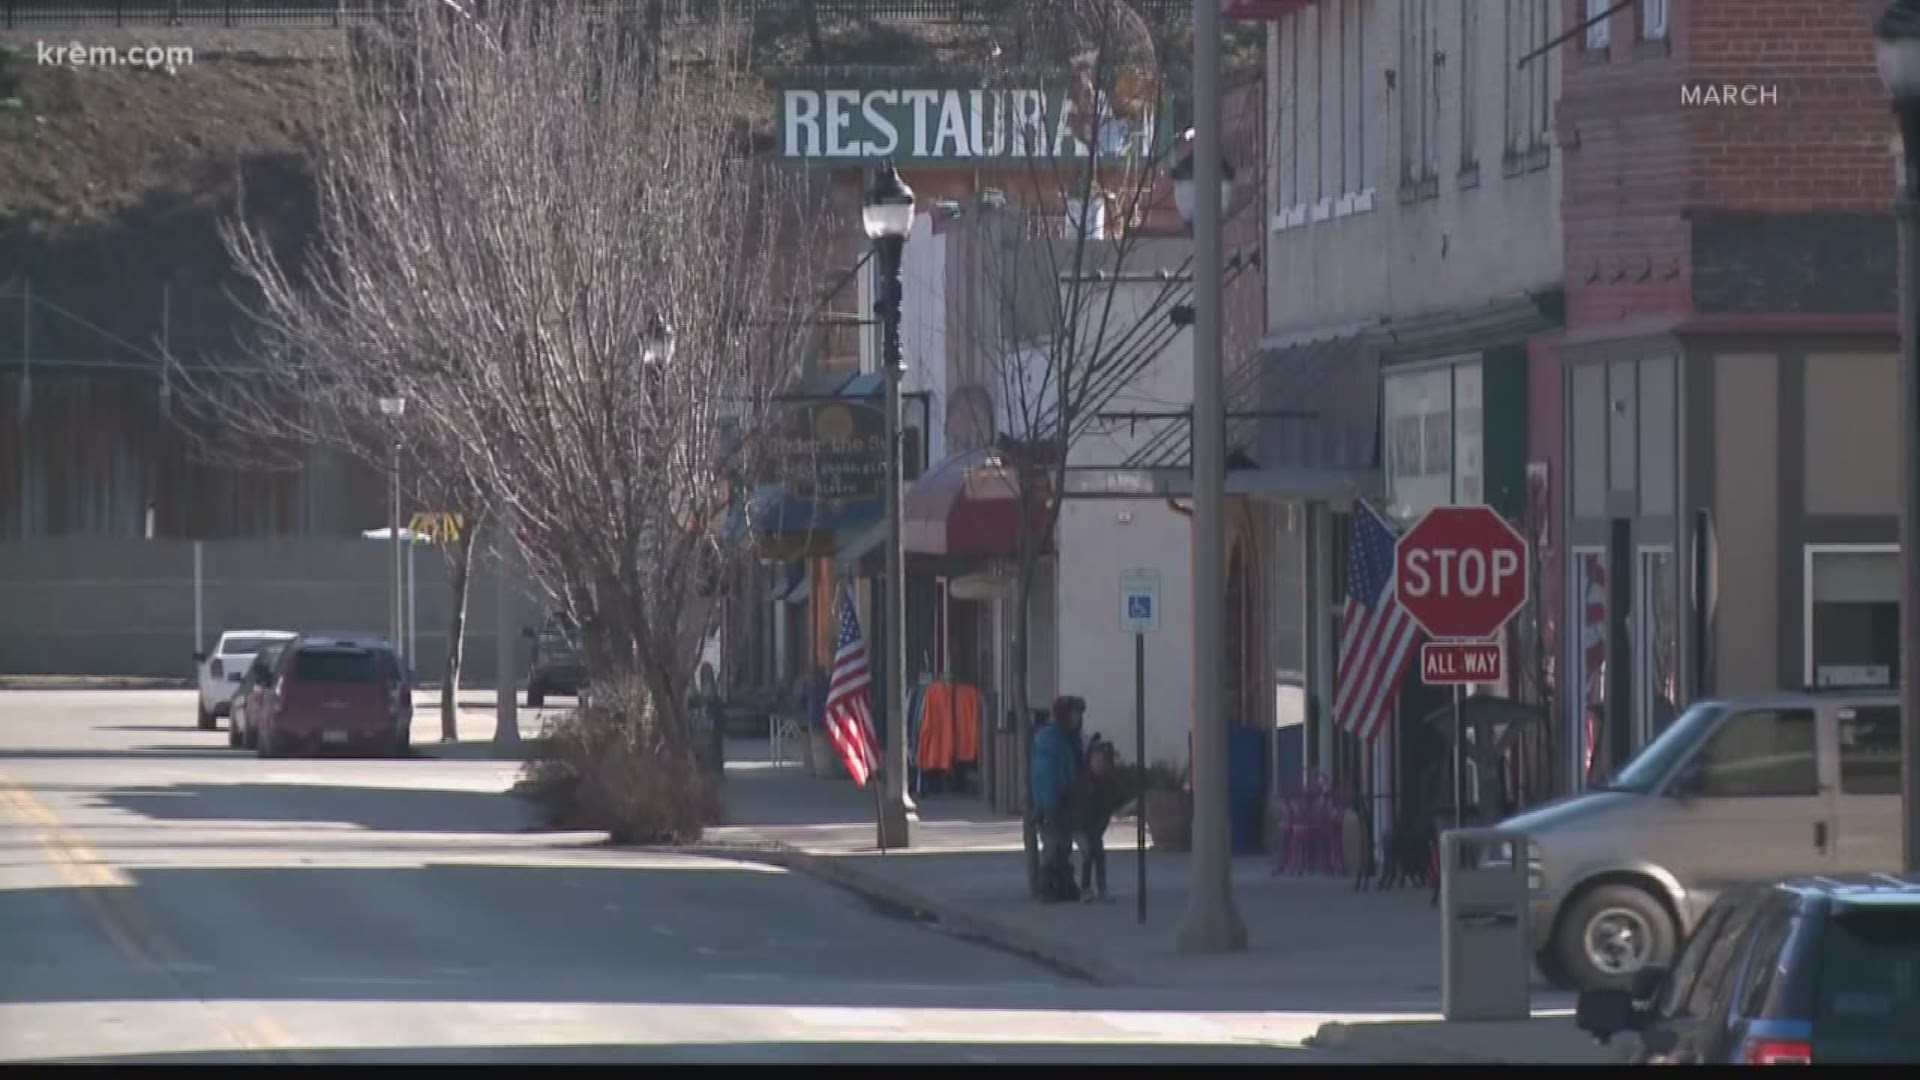 Even if Idaho's stay-home order is lifted, businesses in Boundary County would still be without Canadian customers, as the border closure was extended 30 days.